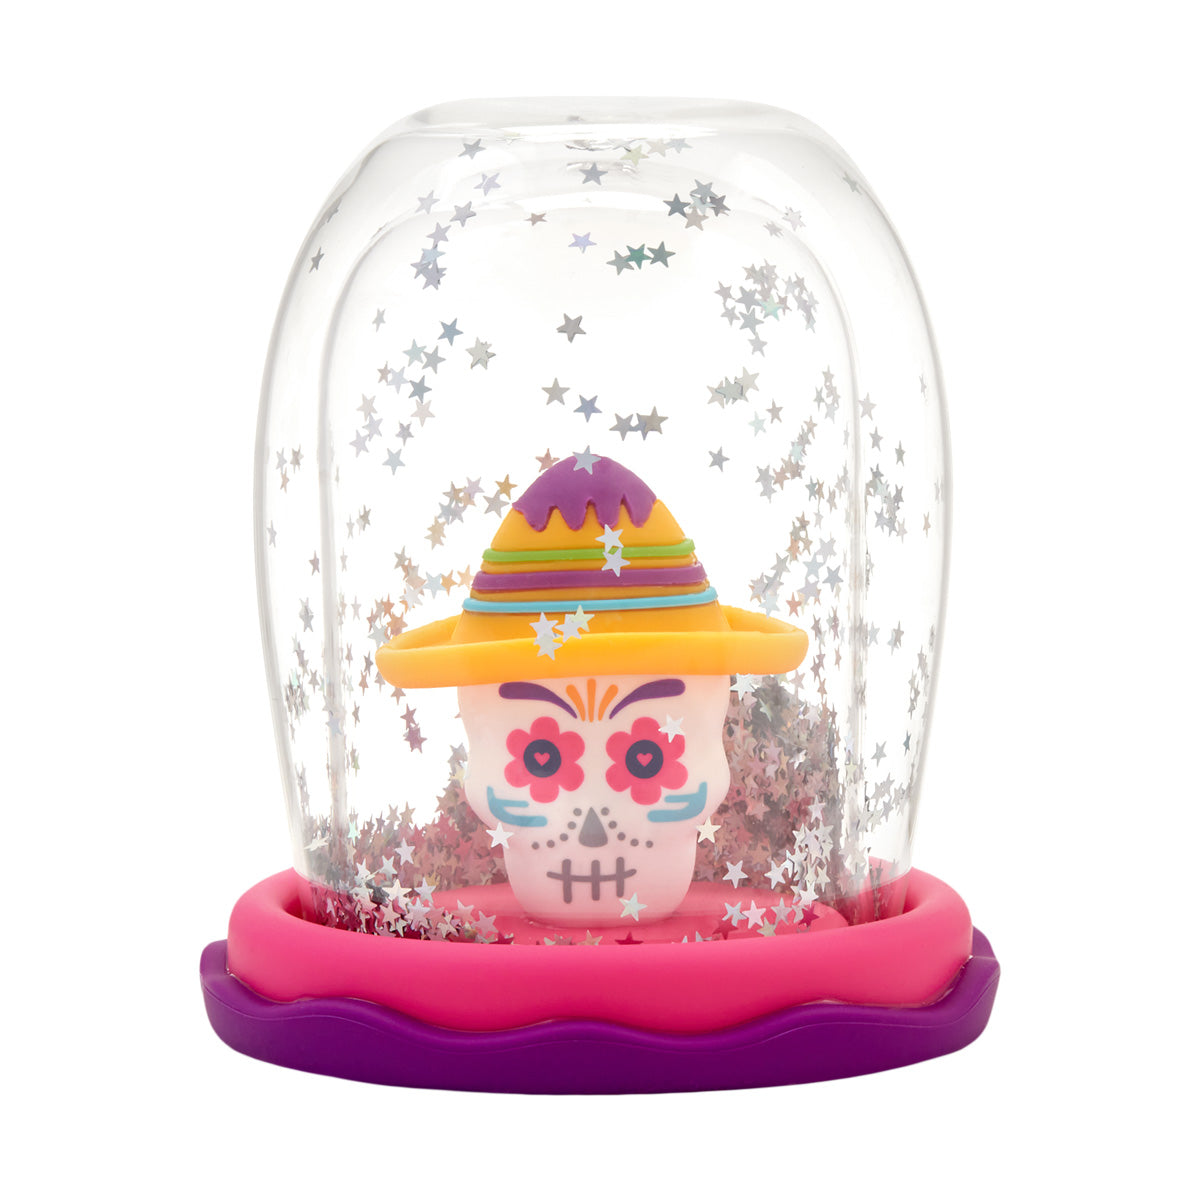 Skull snow globe cup, Day of the dead snow globe - MAGIC GLOBE 380ml double layer cup